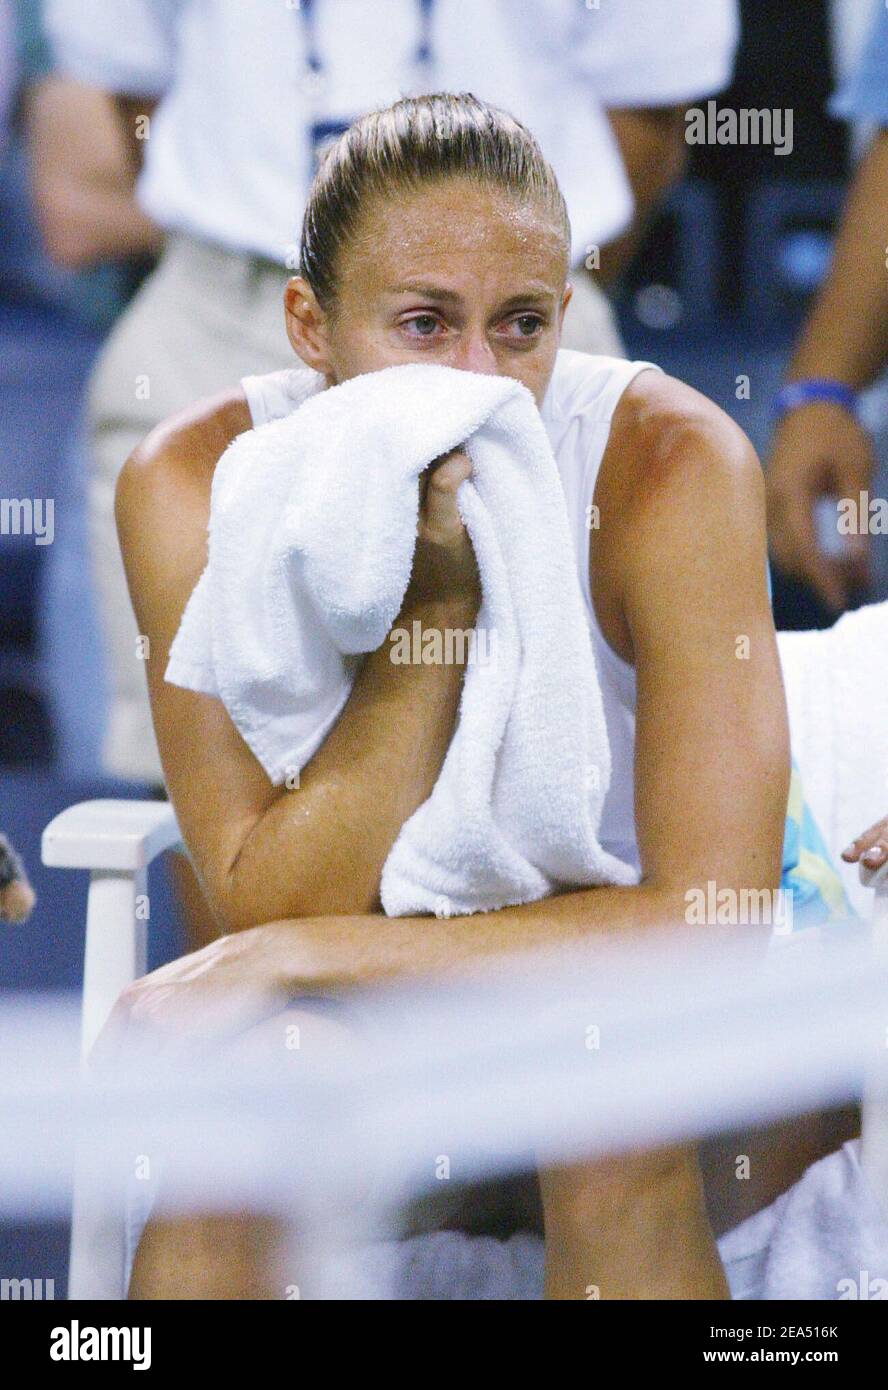 Belgium's Kim Clijsters defeated 6-3, 6-1 France's Mary Pierce in the Women's Final at the 2005 US Open, held at the Arthur Ashe stadium in Flushing Meadows, New York, USA, on September 10, 2005. Photo by Nicolas Khayat/Cameleon/ABACAPRESS.COM Stock Photo